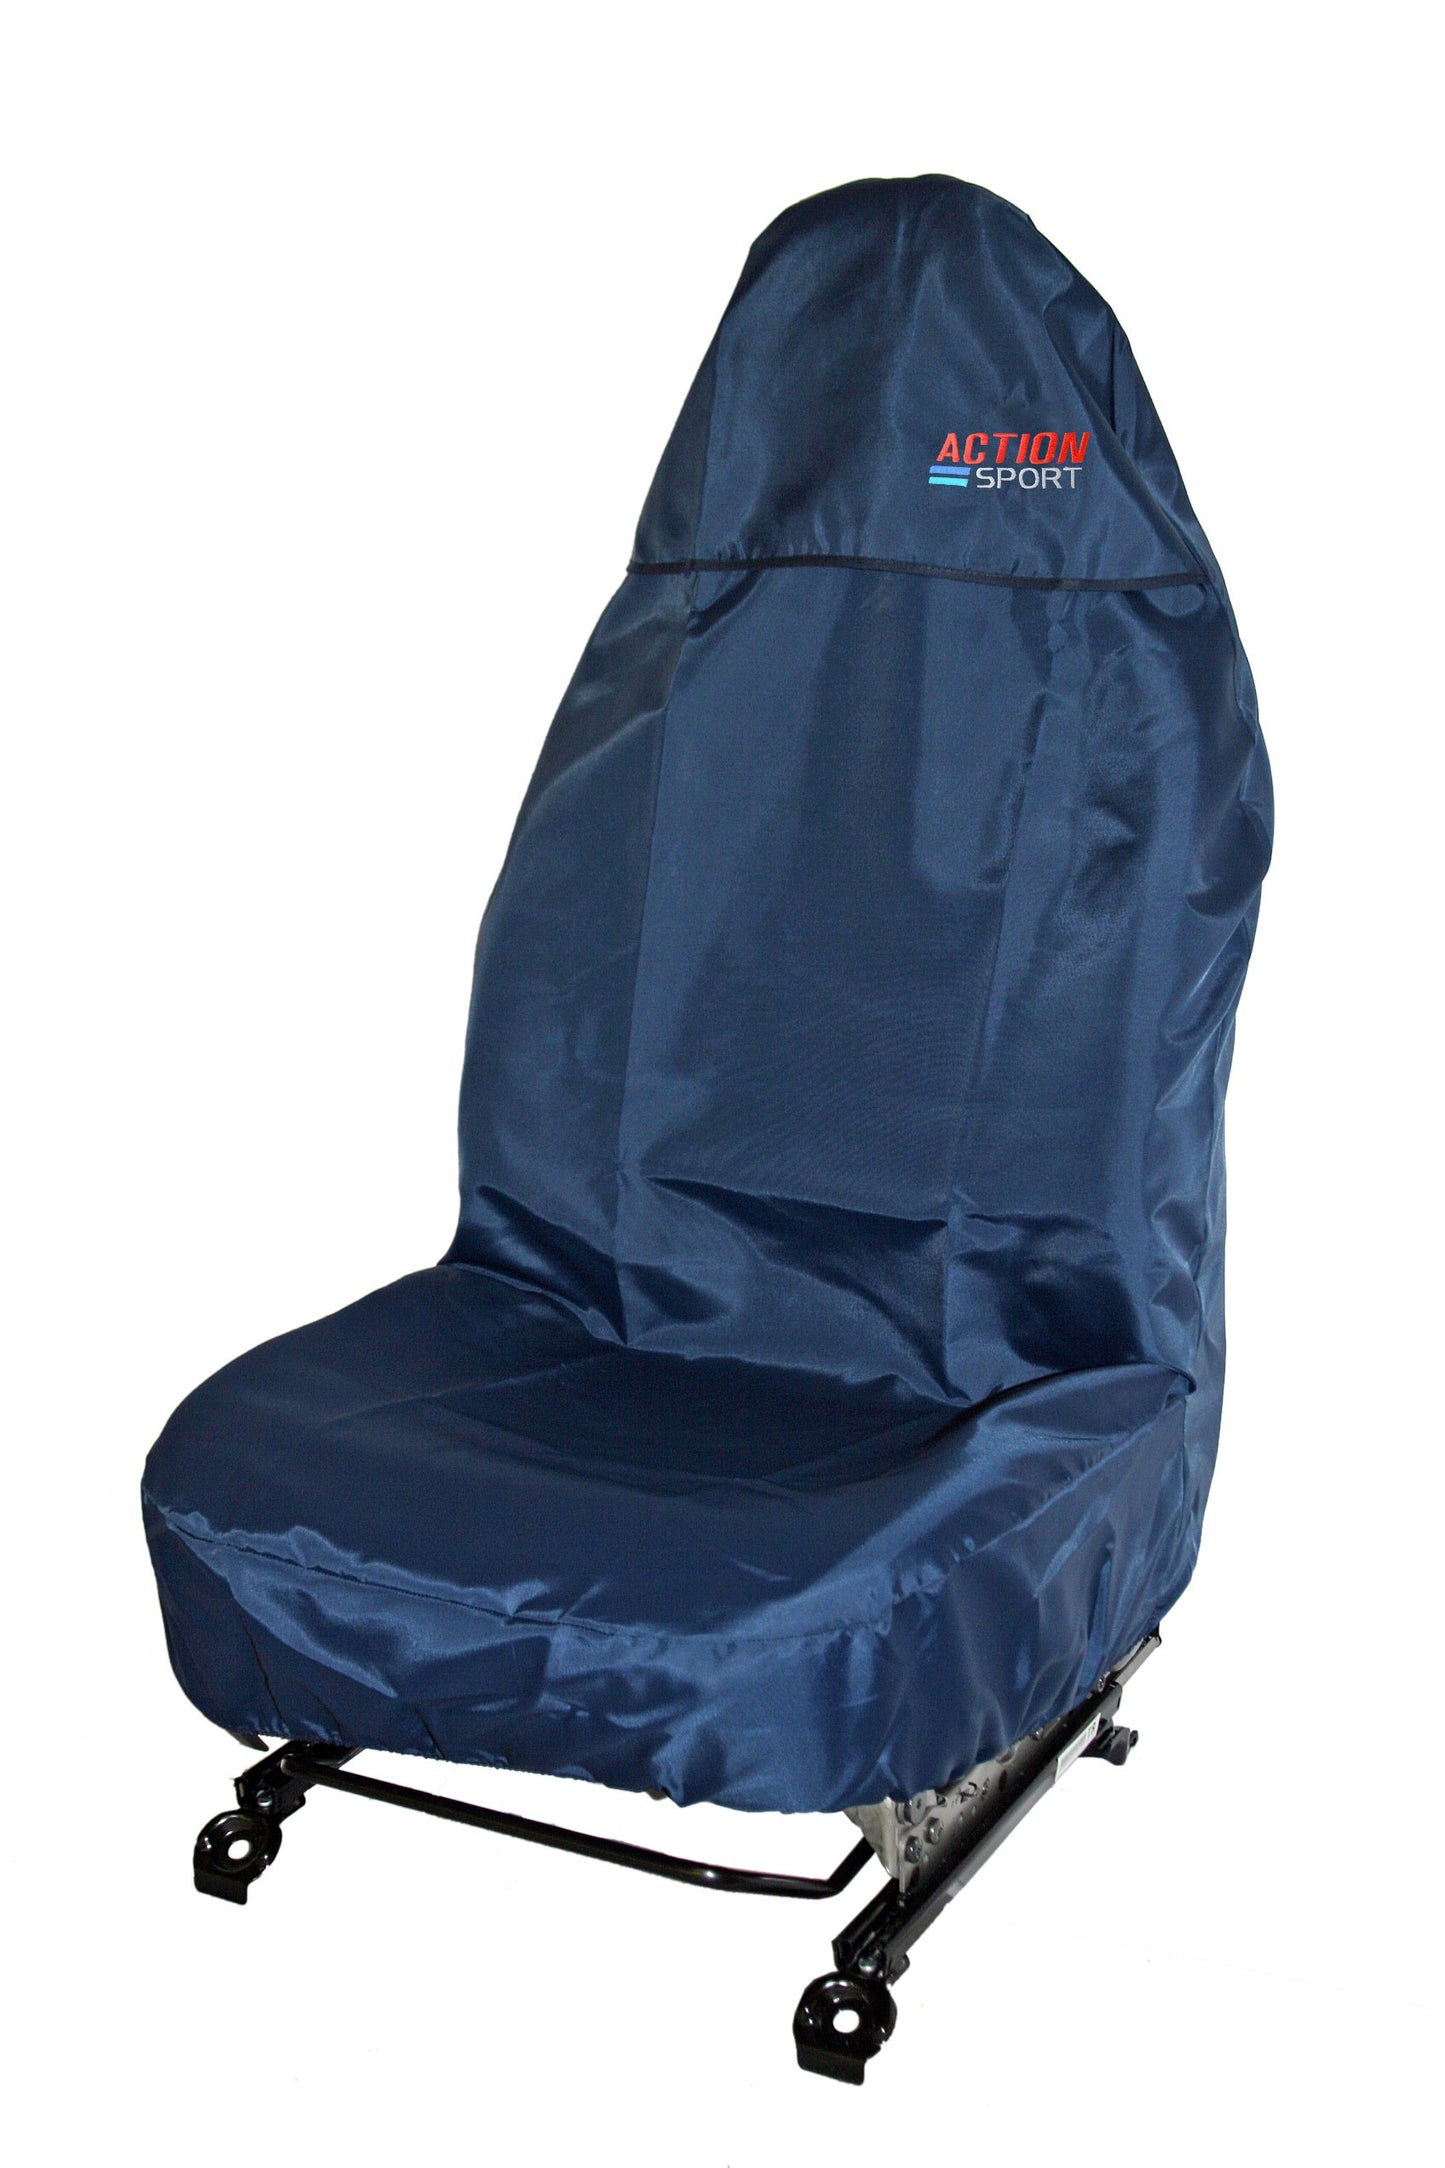 Heavy Duty Action Sport Seat Cover - 4x4 Single cover